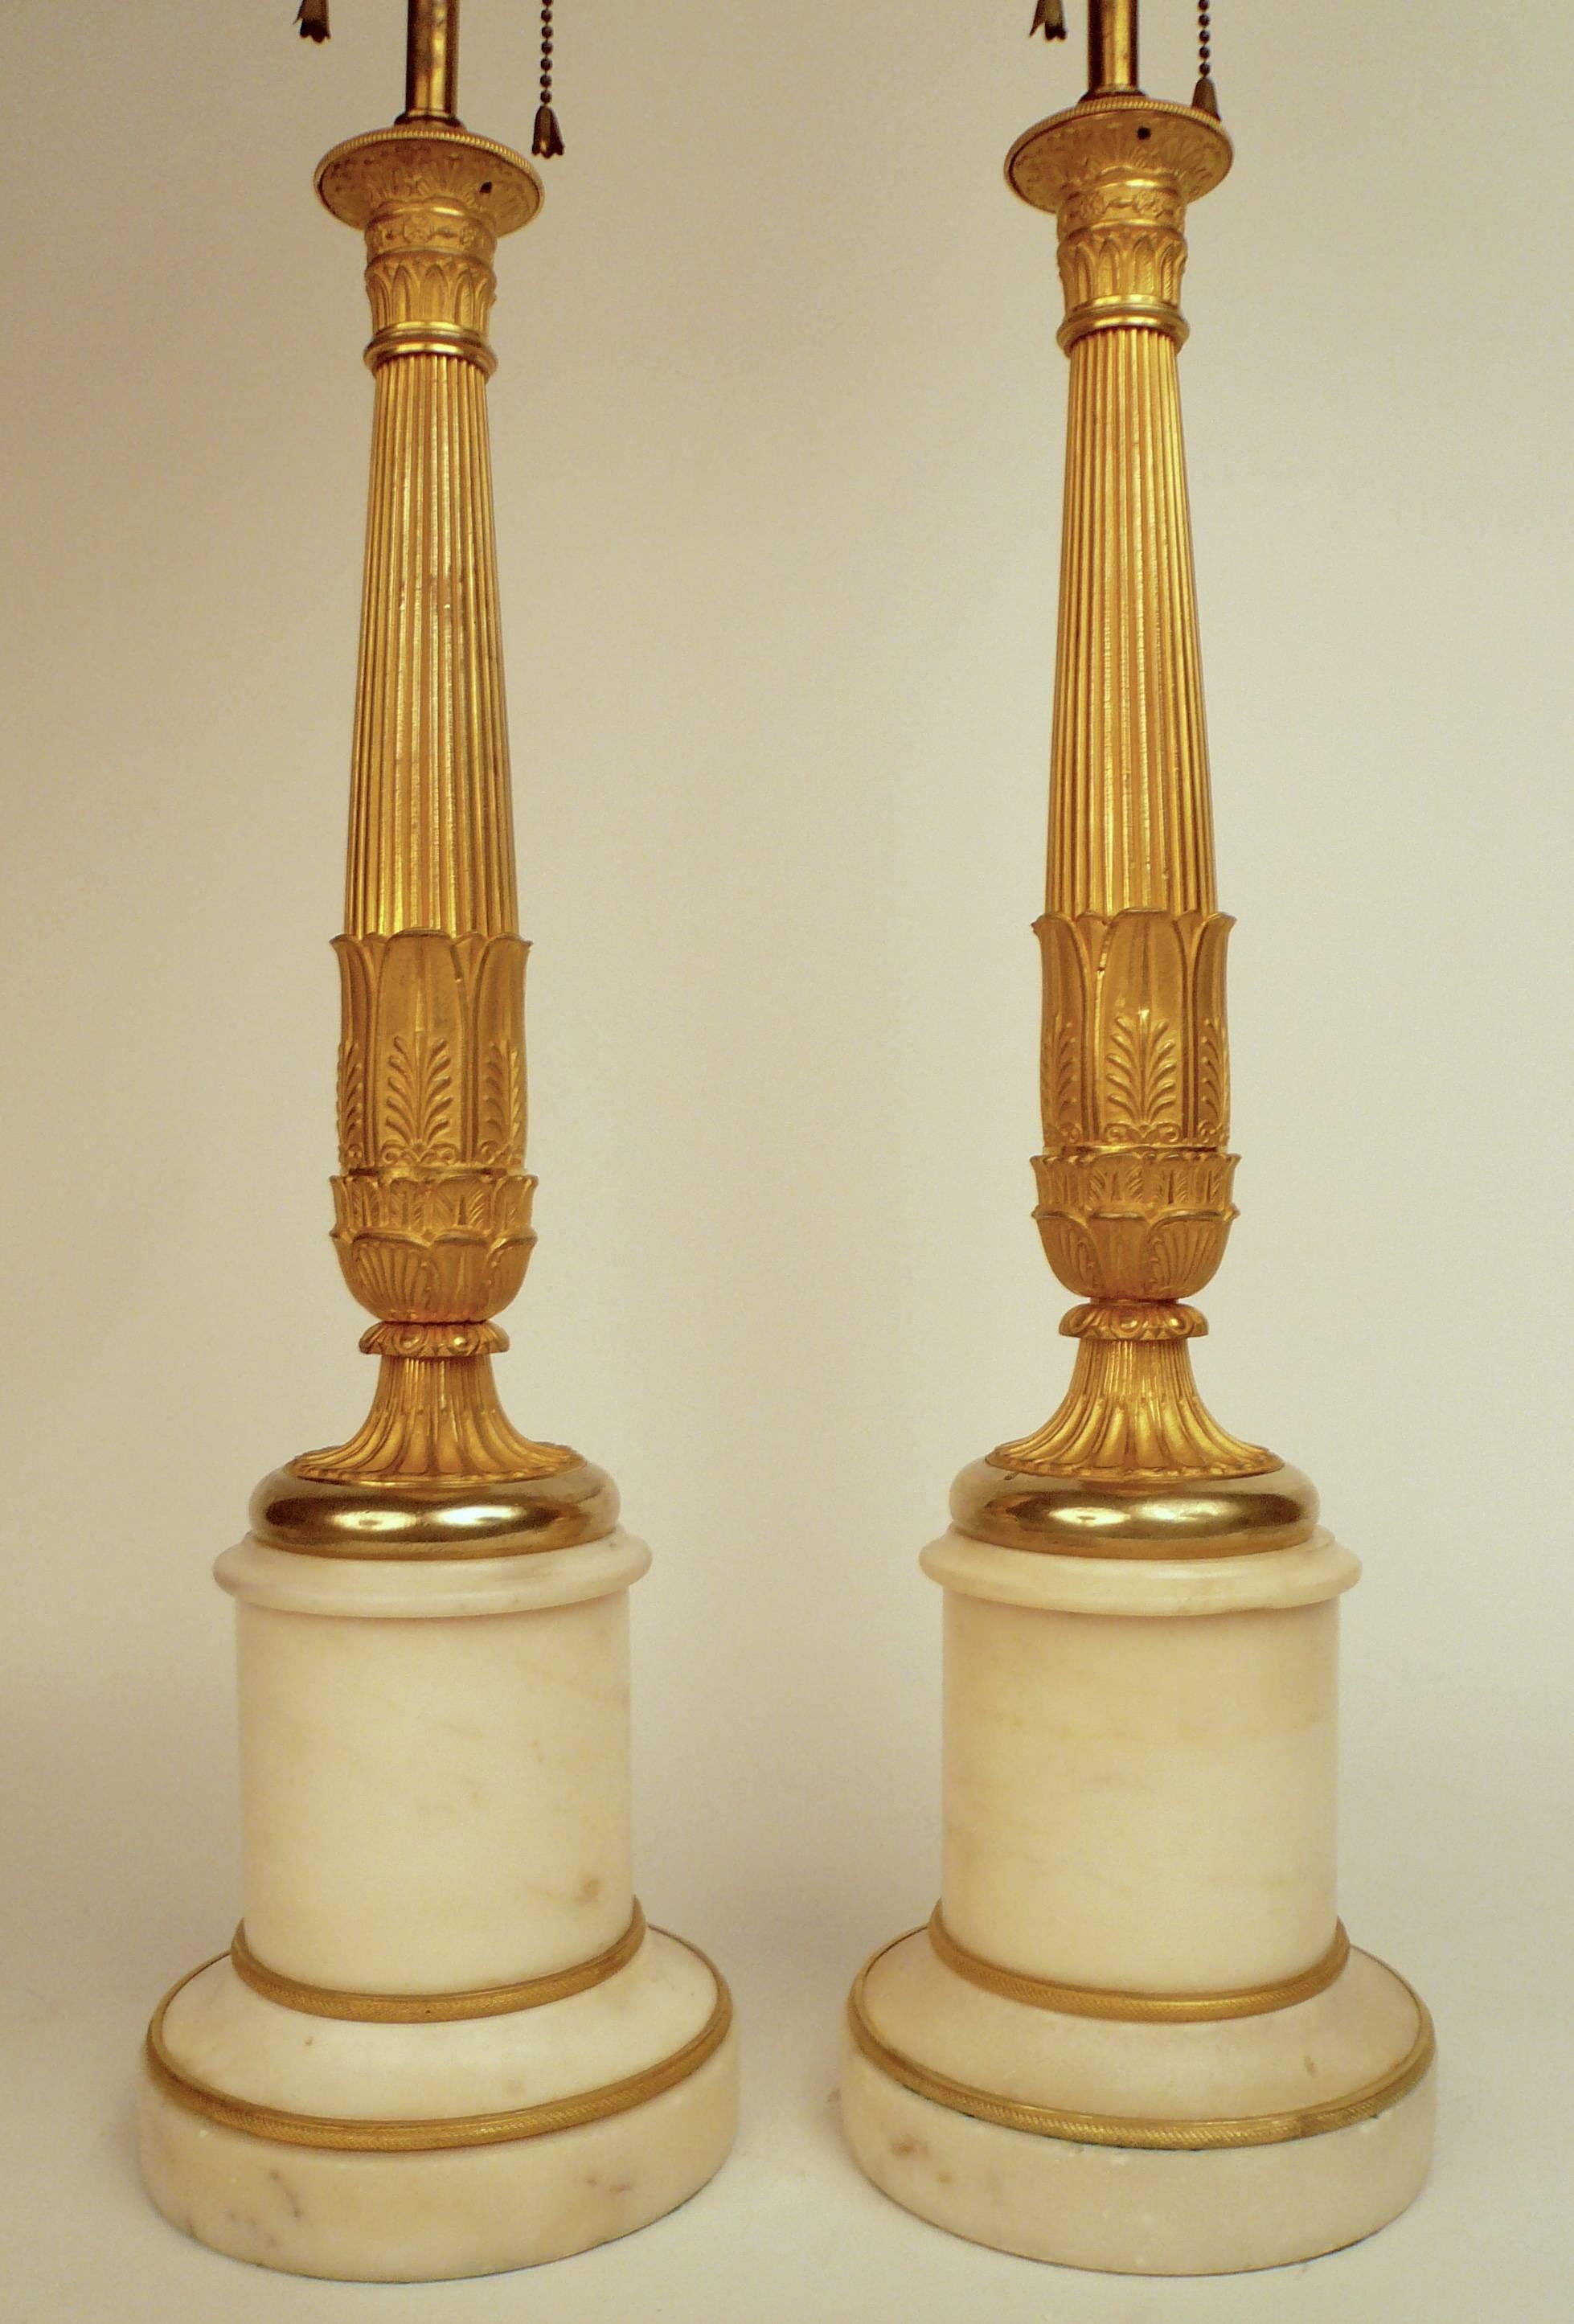 This fine pair of bronze and marble lamps feature neoclassical motifs including acanthus leaves and tapering reeded columns.